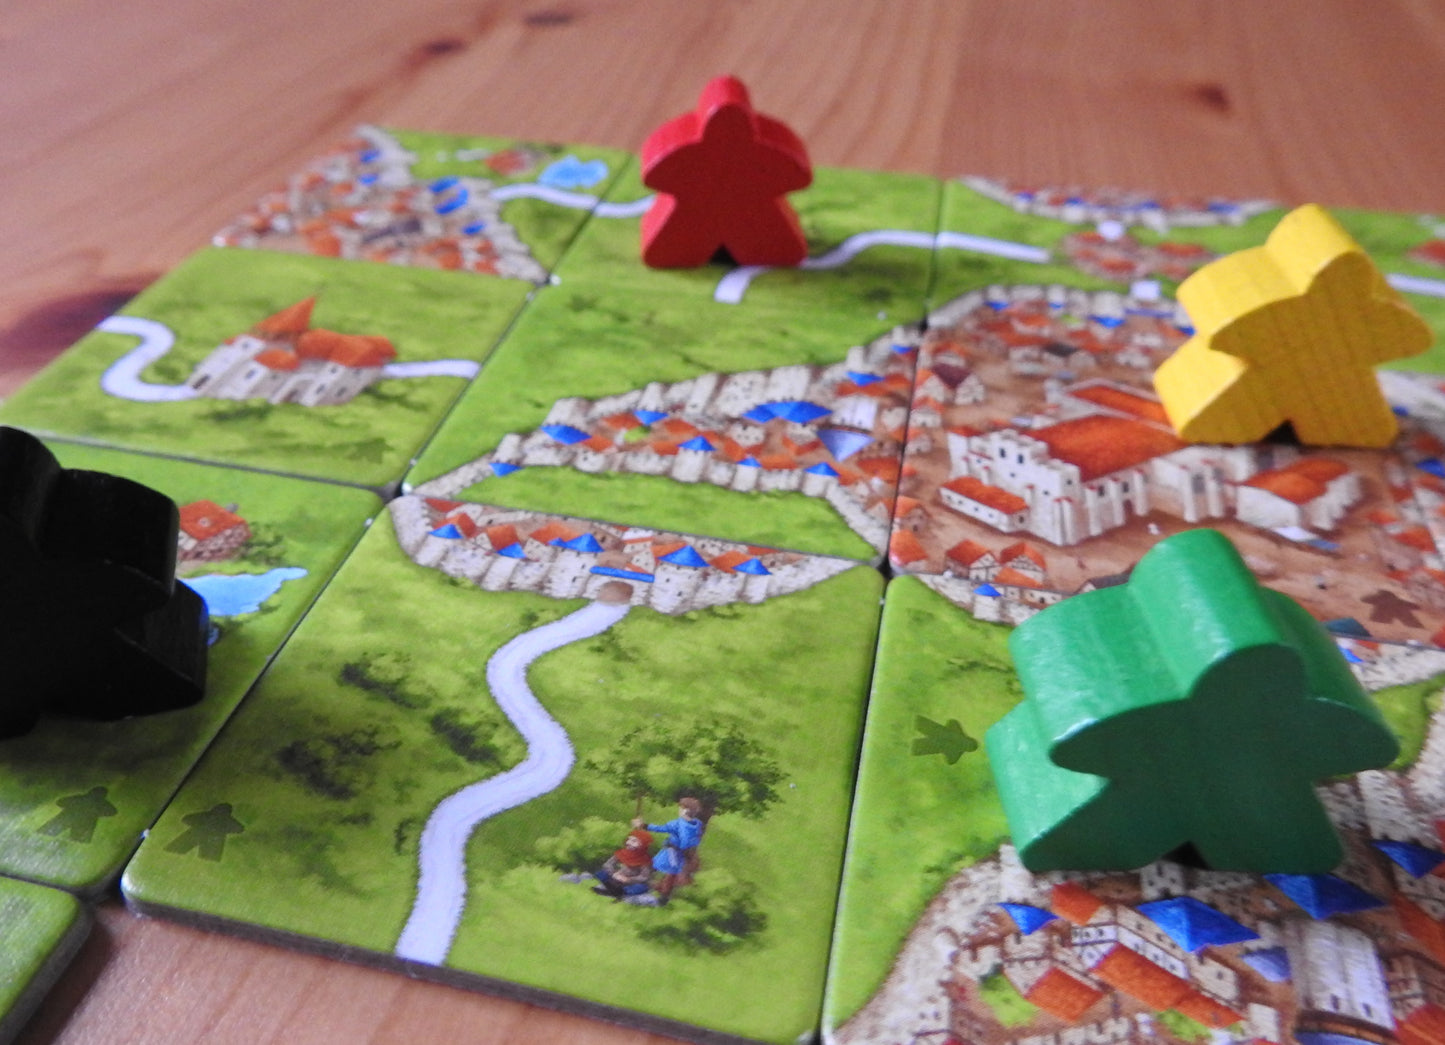 Some more meeples, tiles and abbots included in this Carcassonne Inns & Cathedrals expansion.